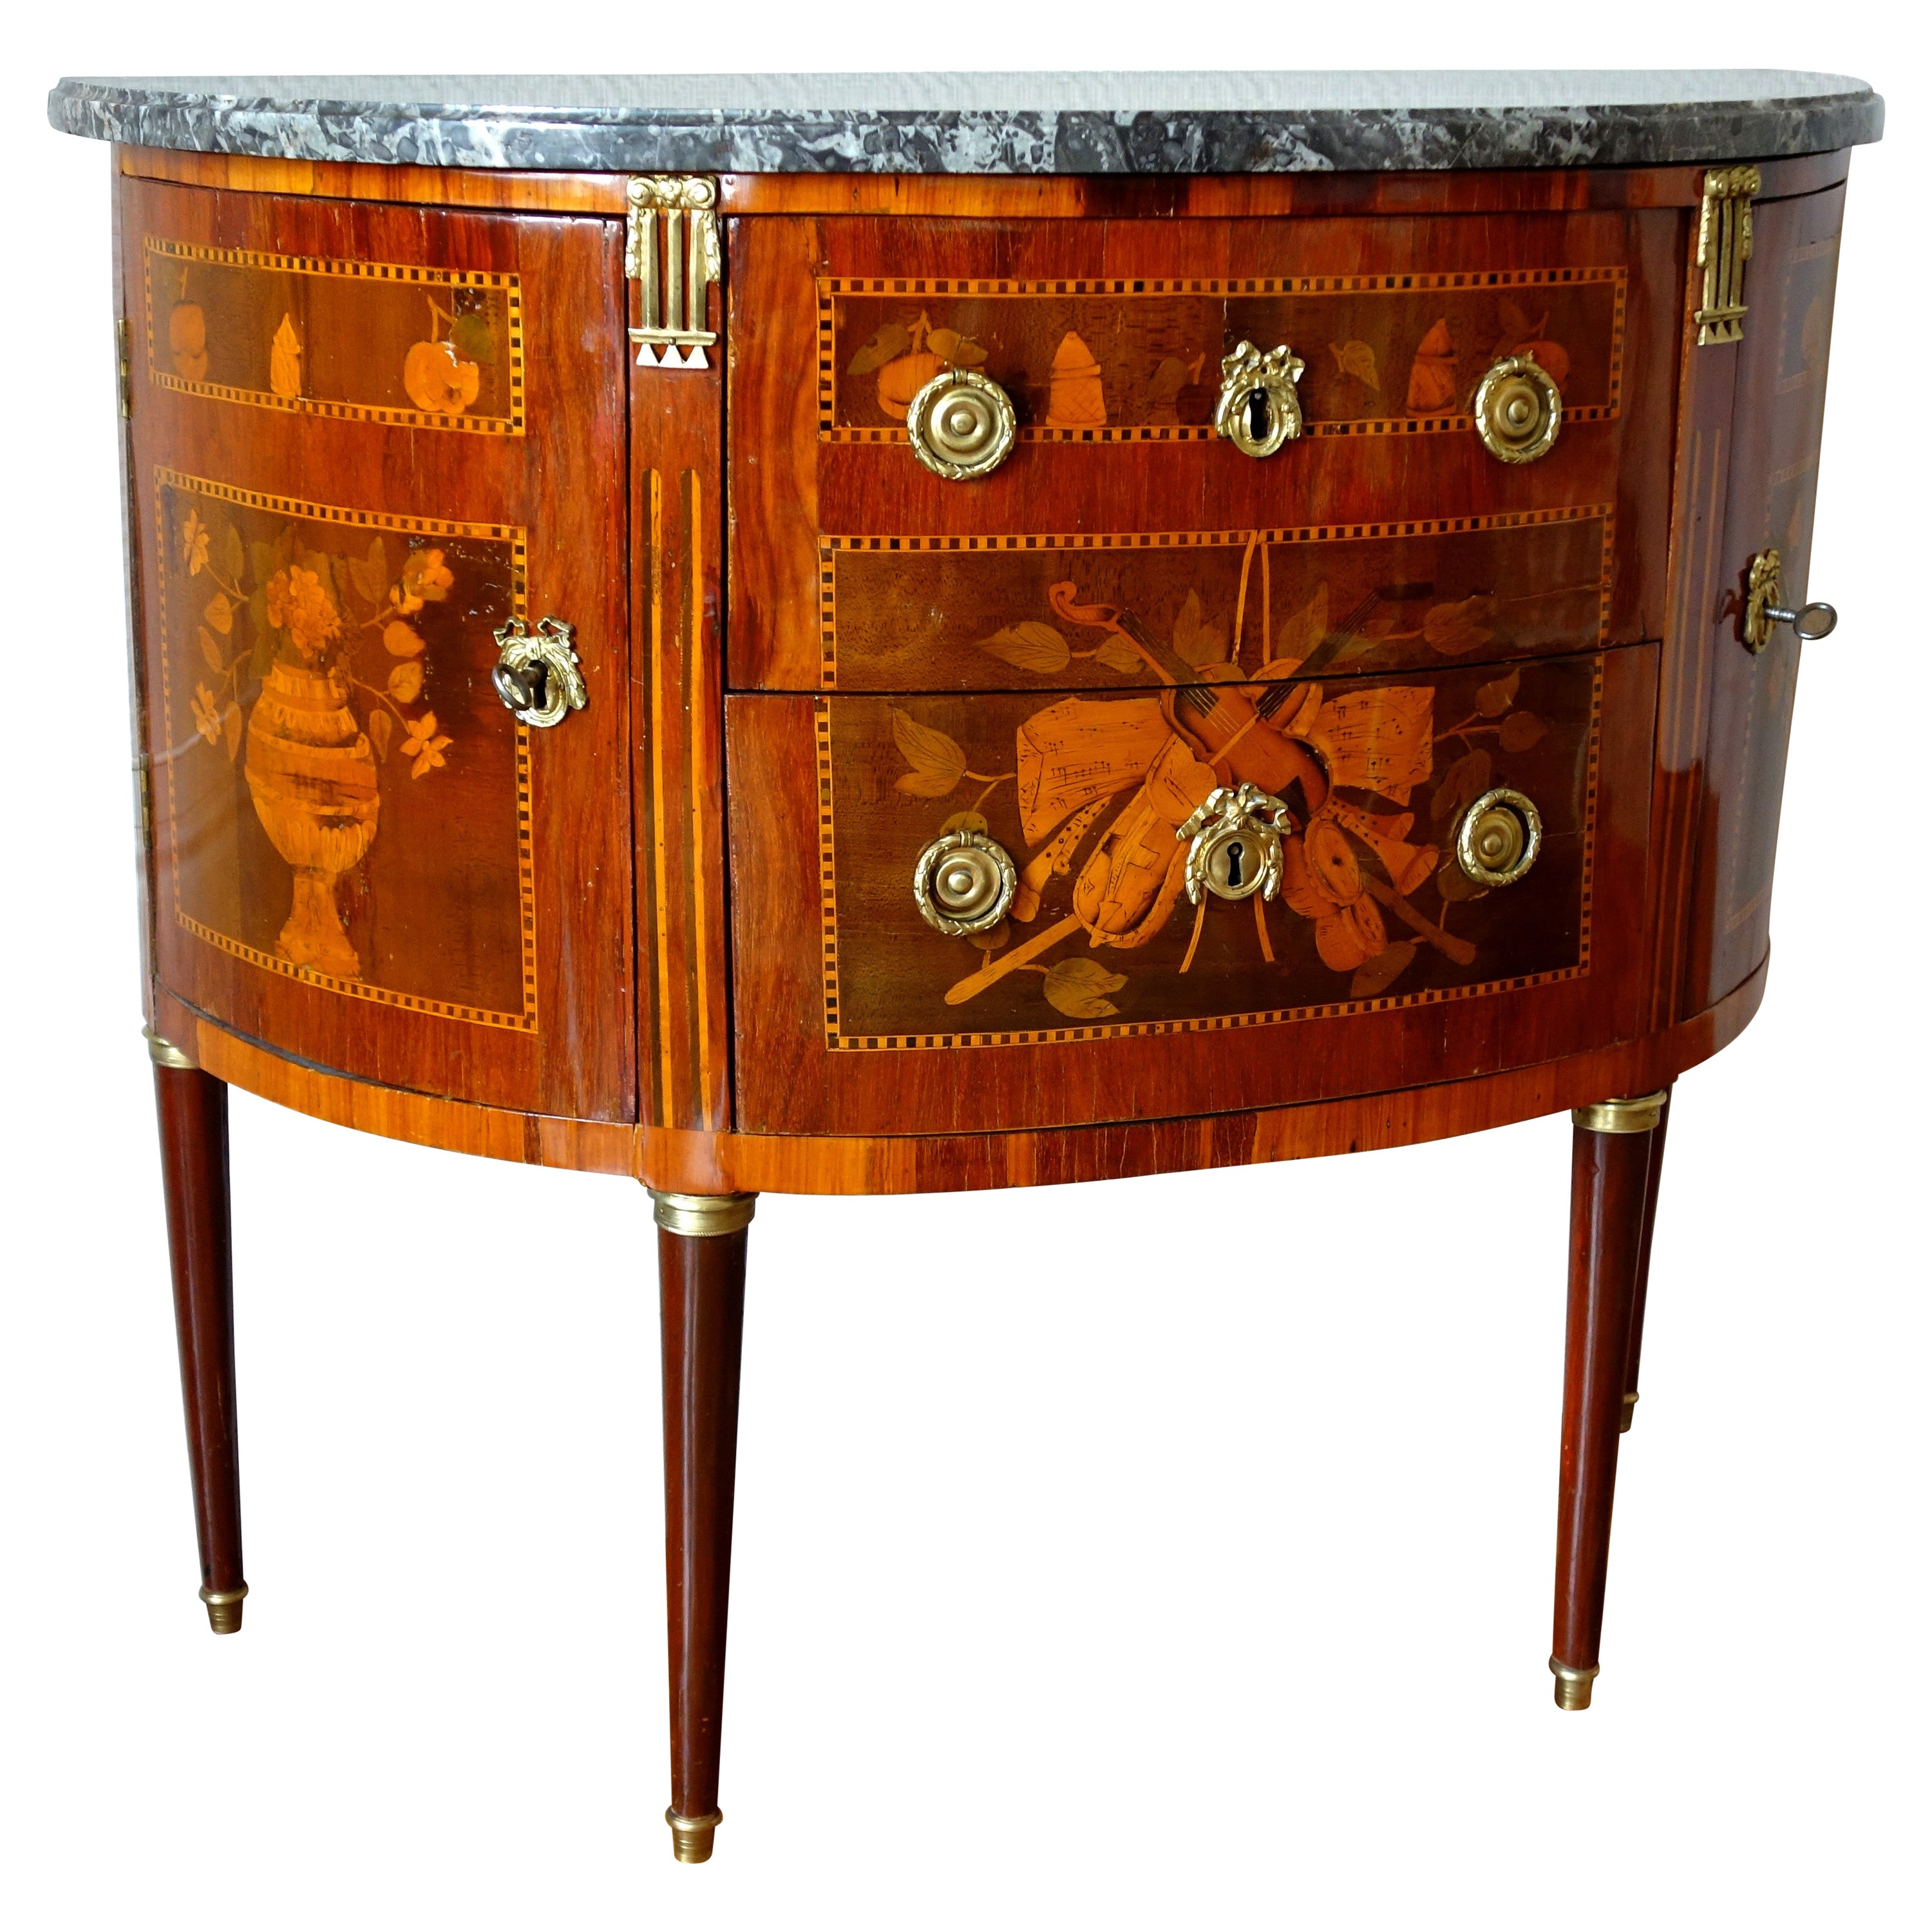 Louis XVI Half-Moon Marquetry Commode / Chest of Drawers, Stamped - 18th Century